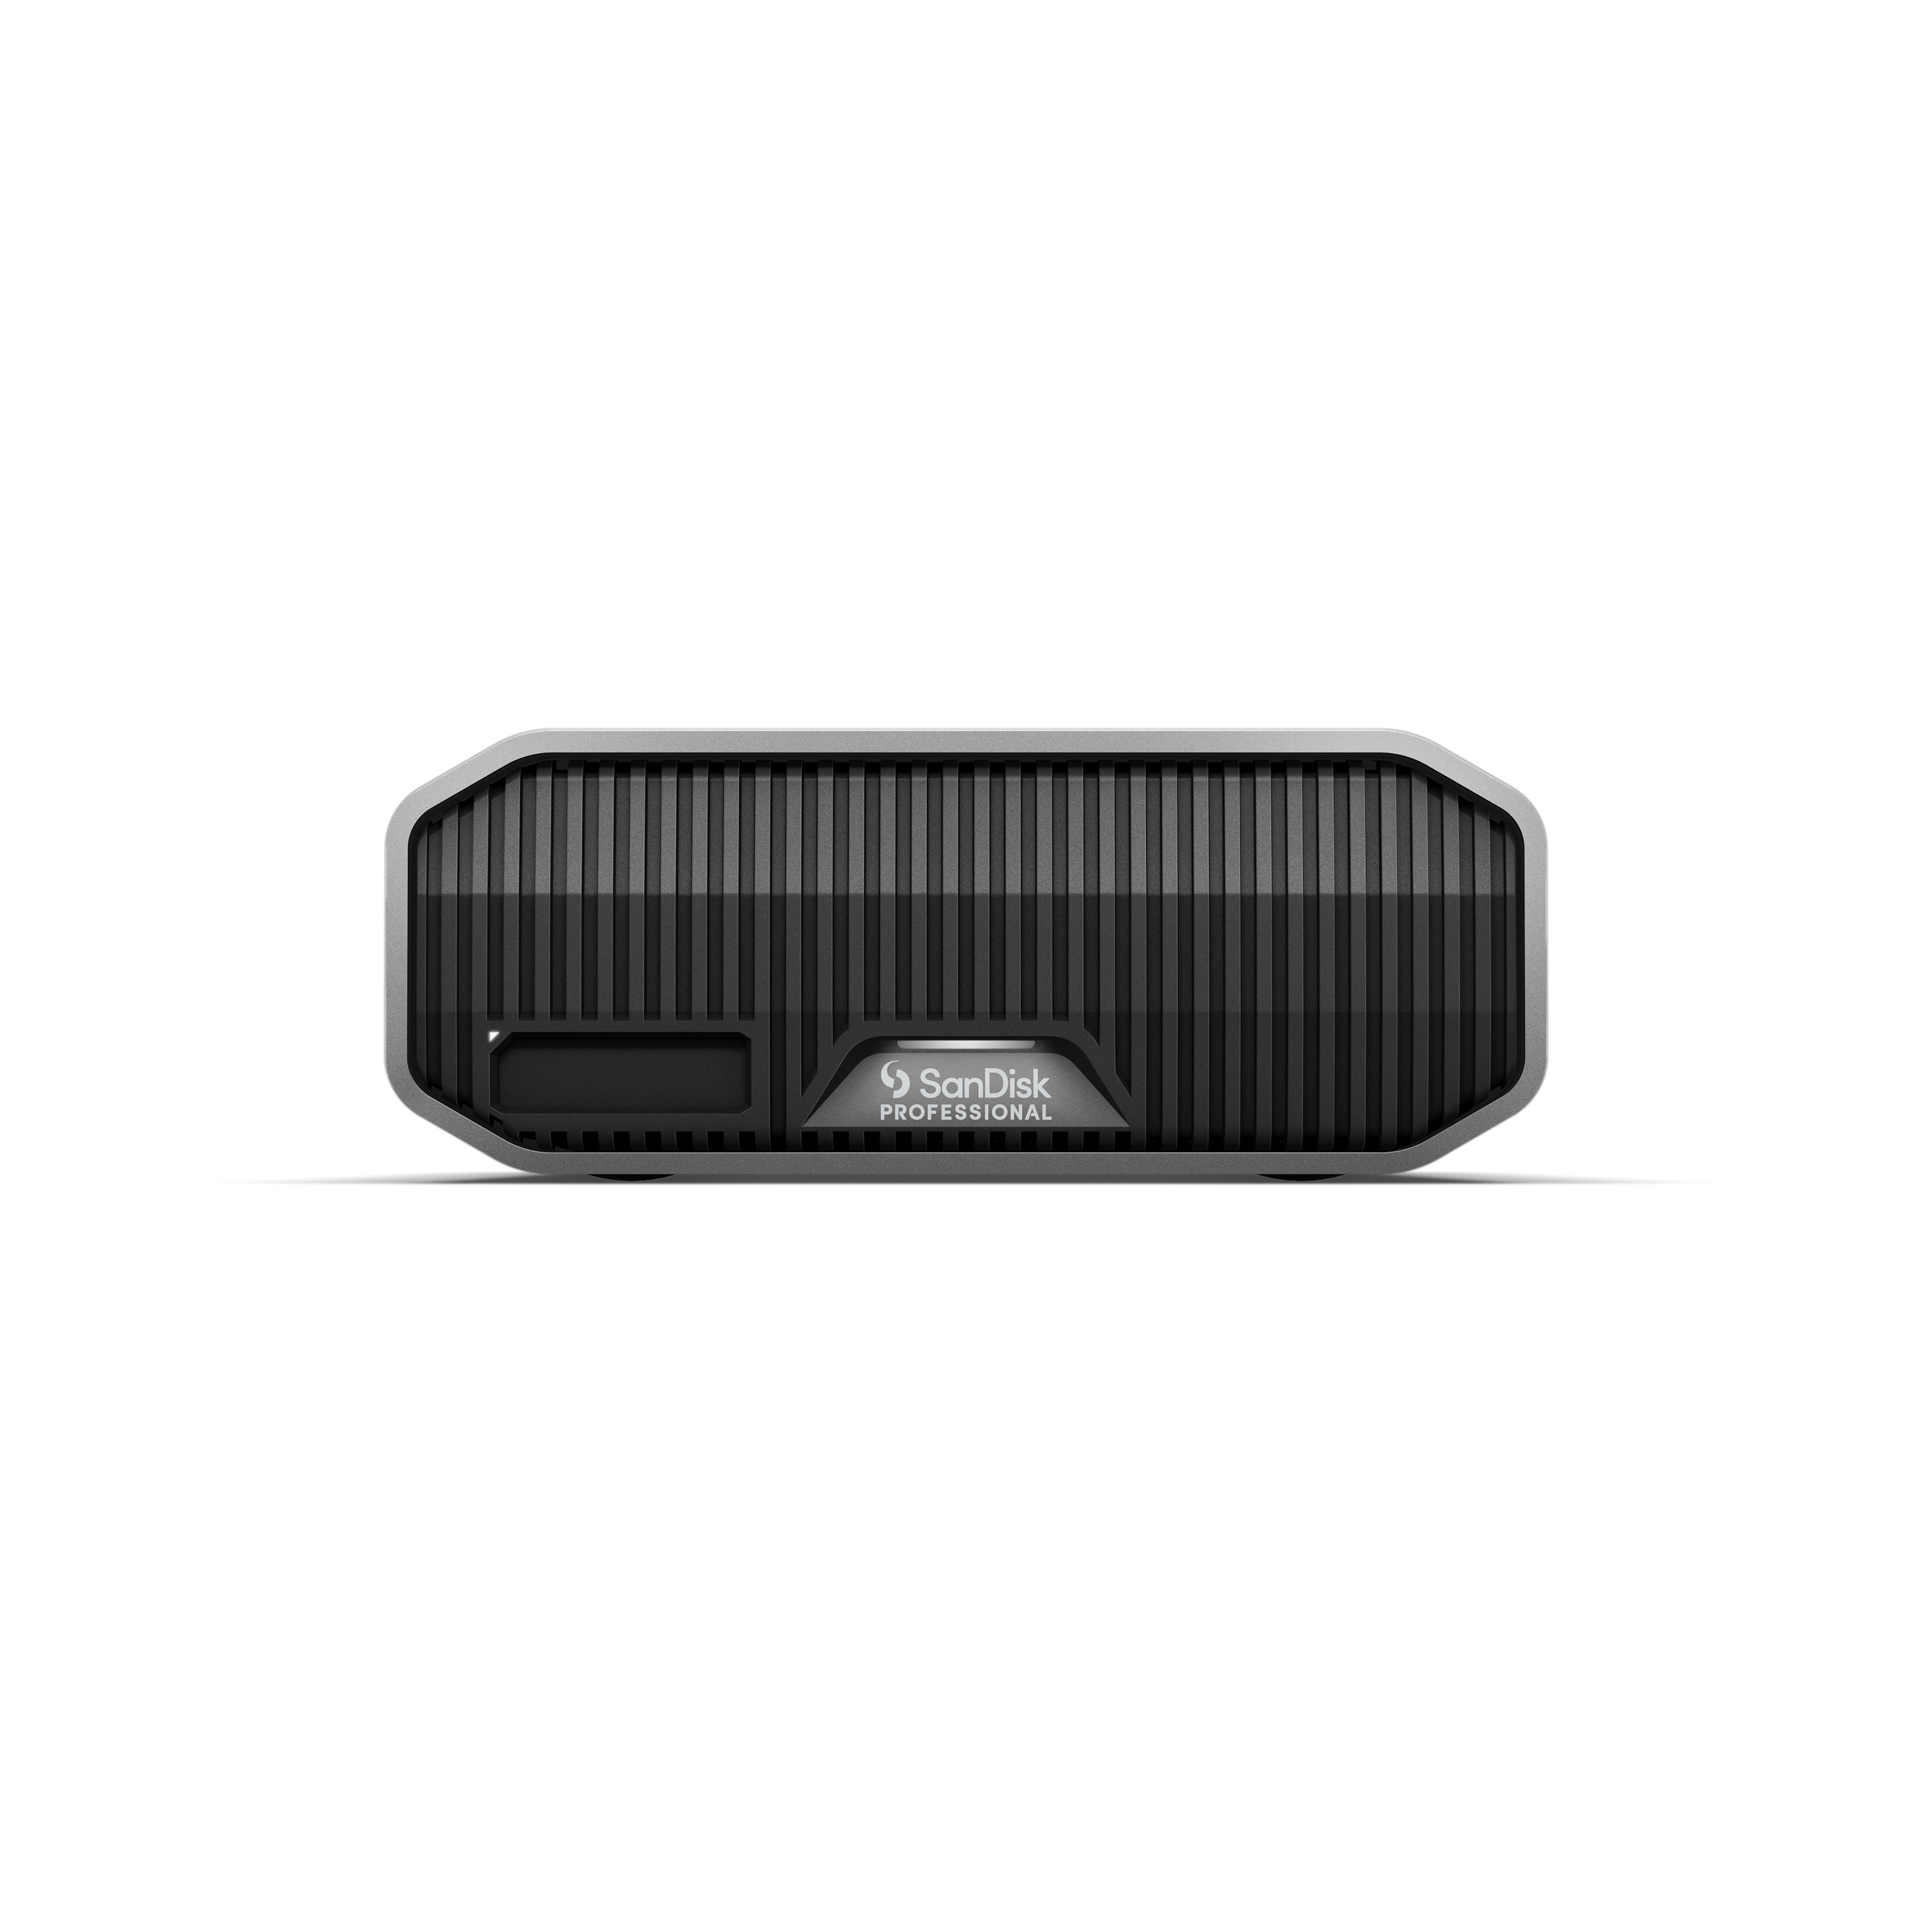 18TB SanDisk Professional G-DRIVE PROJECT- G-DRIVE PRO SDPHG1H-018T-MBAAD